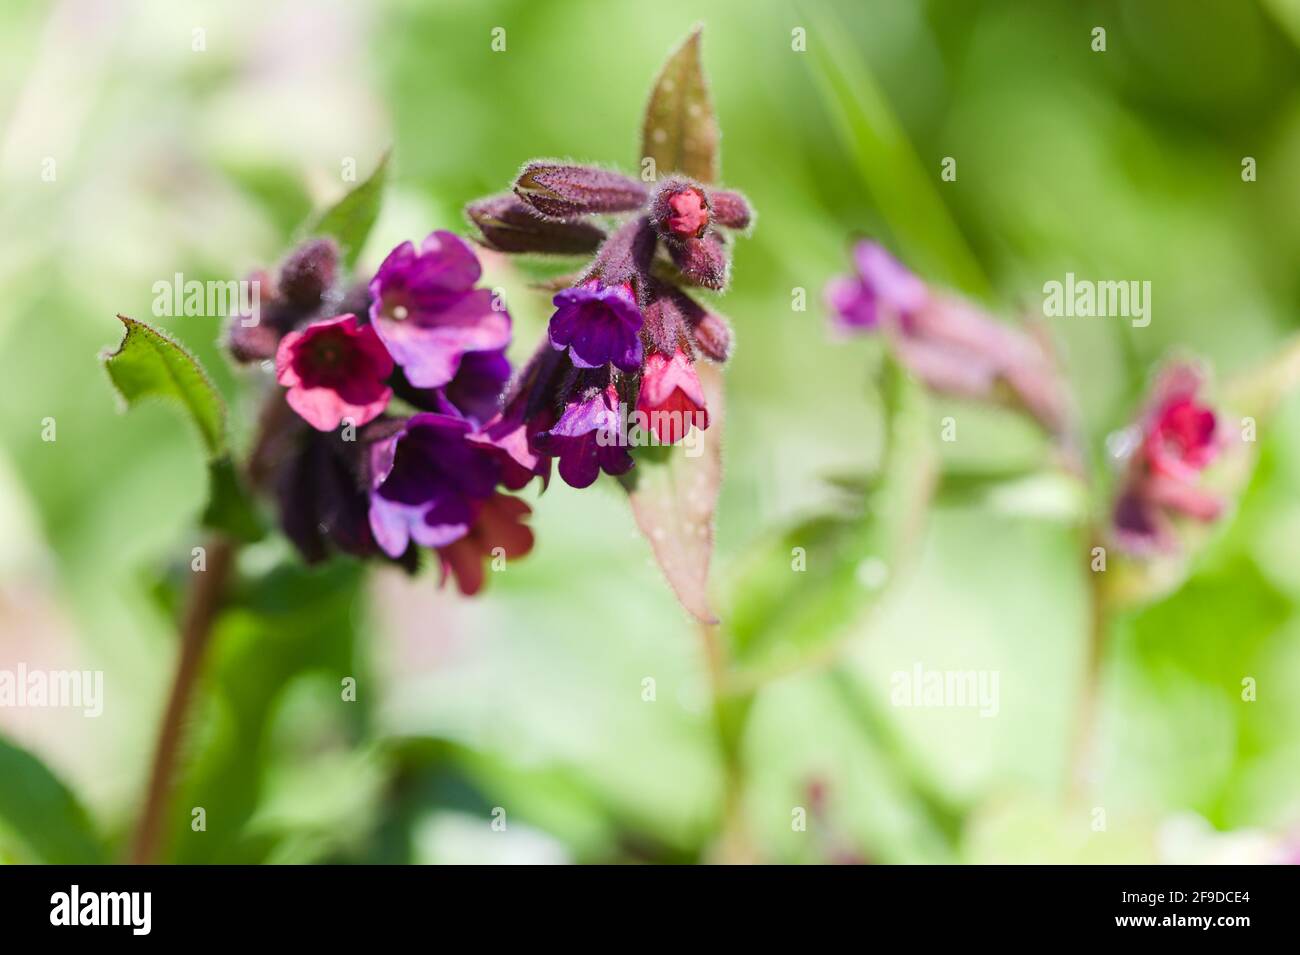 View of Fresh blooms of  Lungwort plants (Pulmonaria spp.) growing in  mid-spring, Essex, Britain Stock Photo